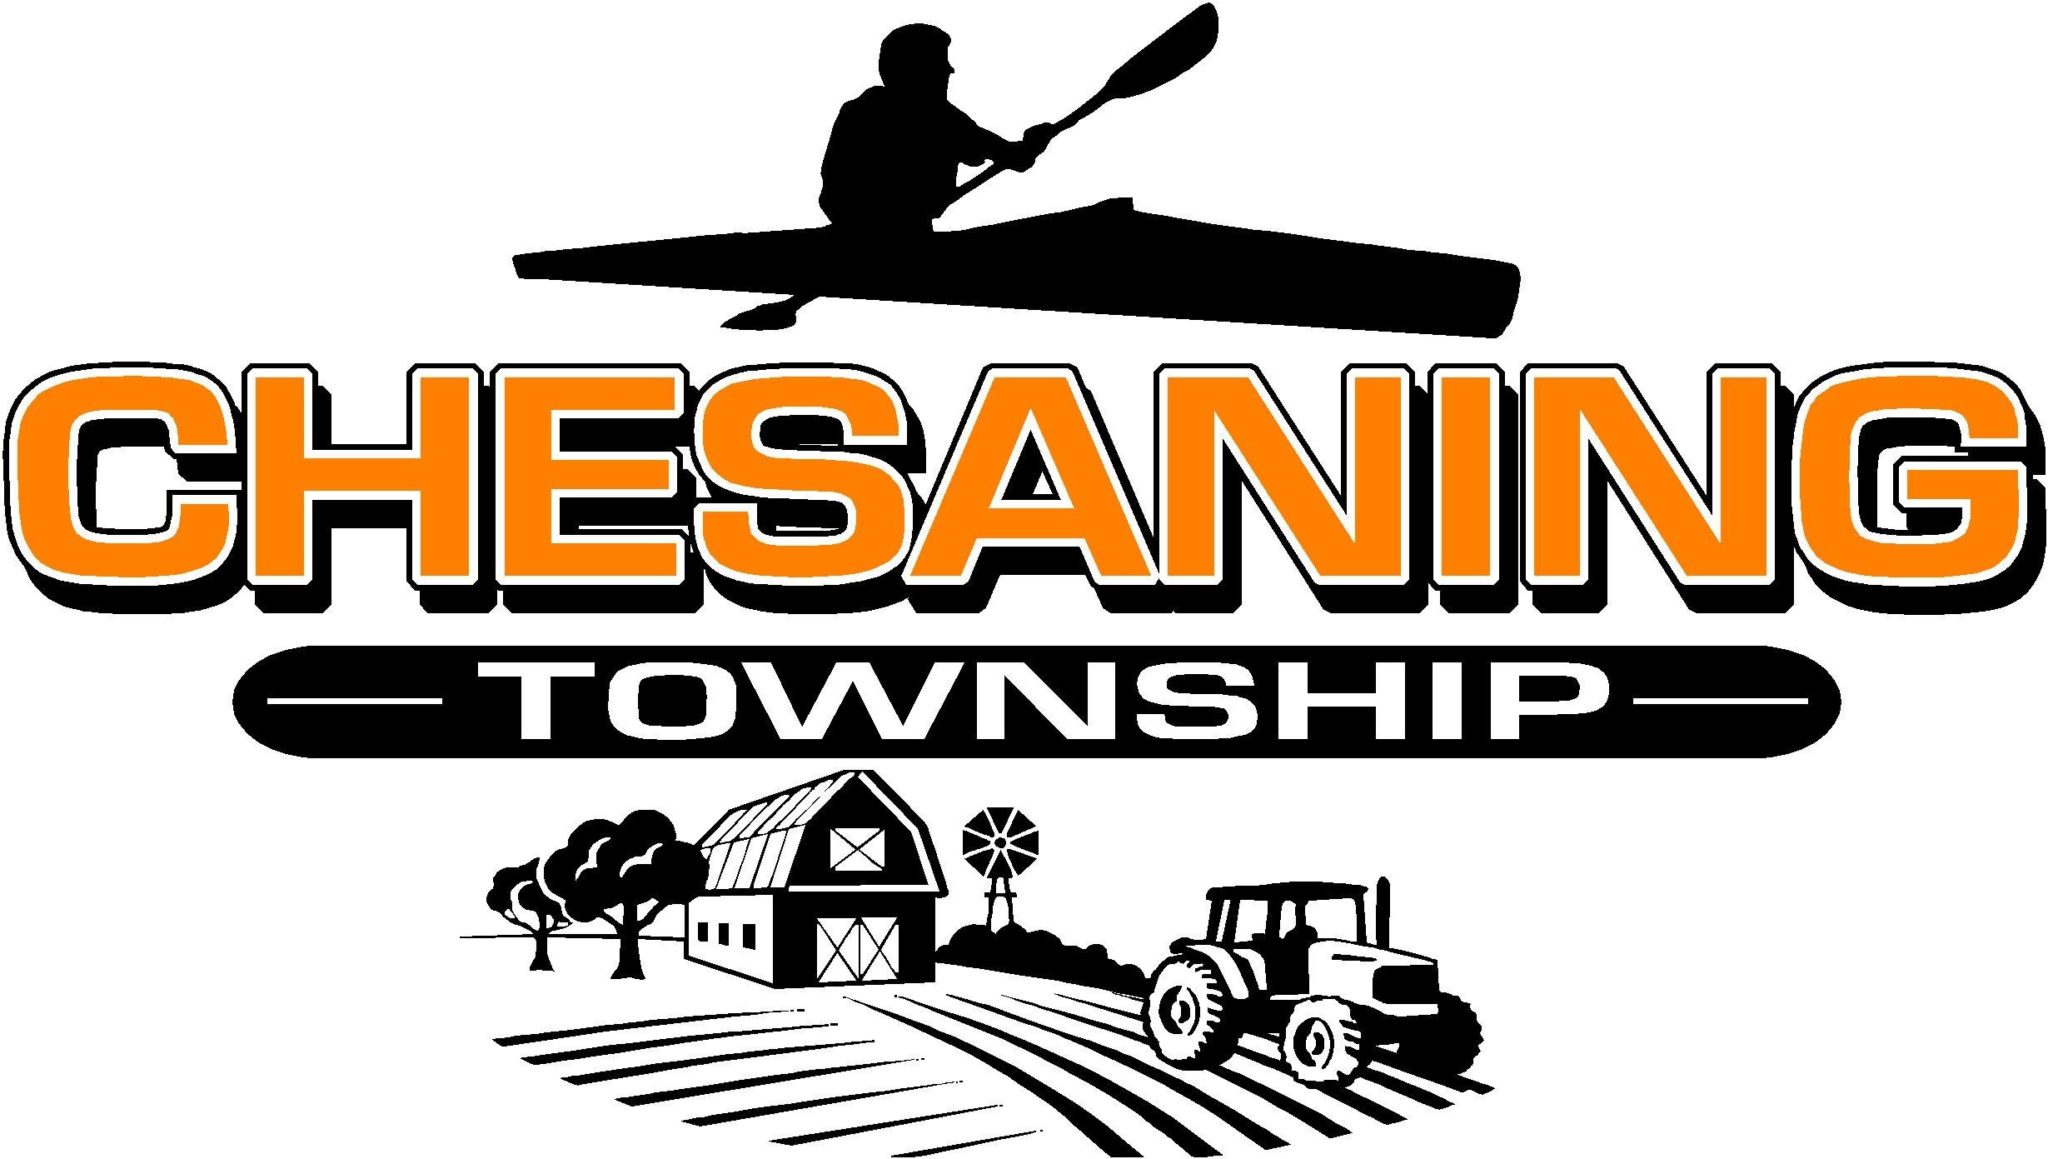 Chesaning Township - $500 Contributor's Image